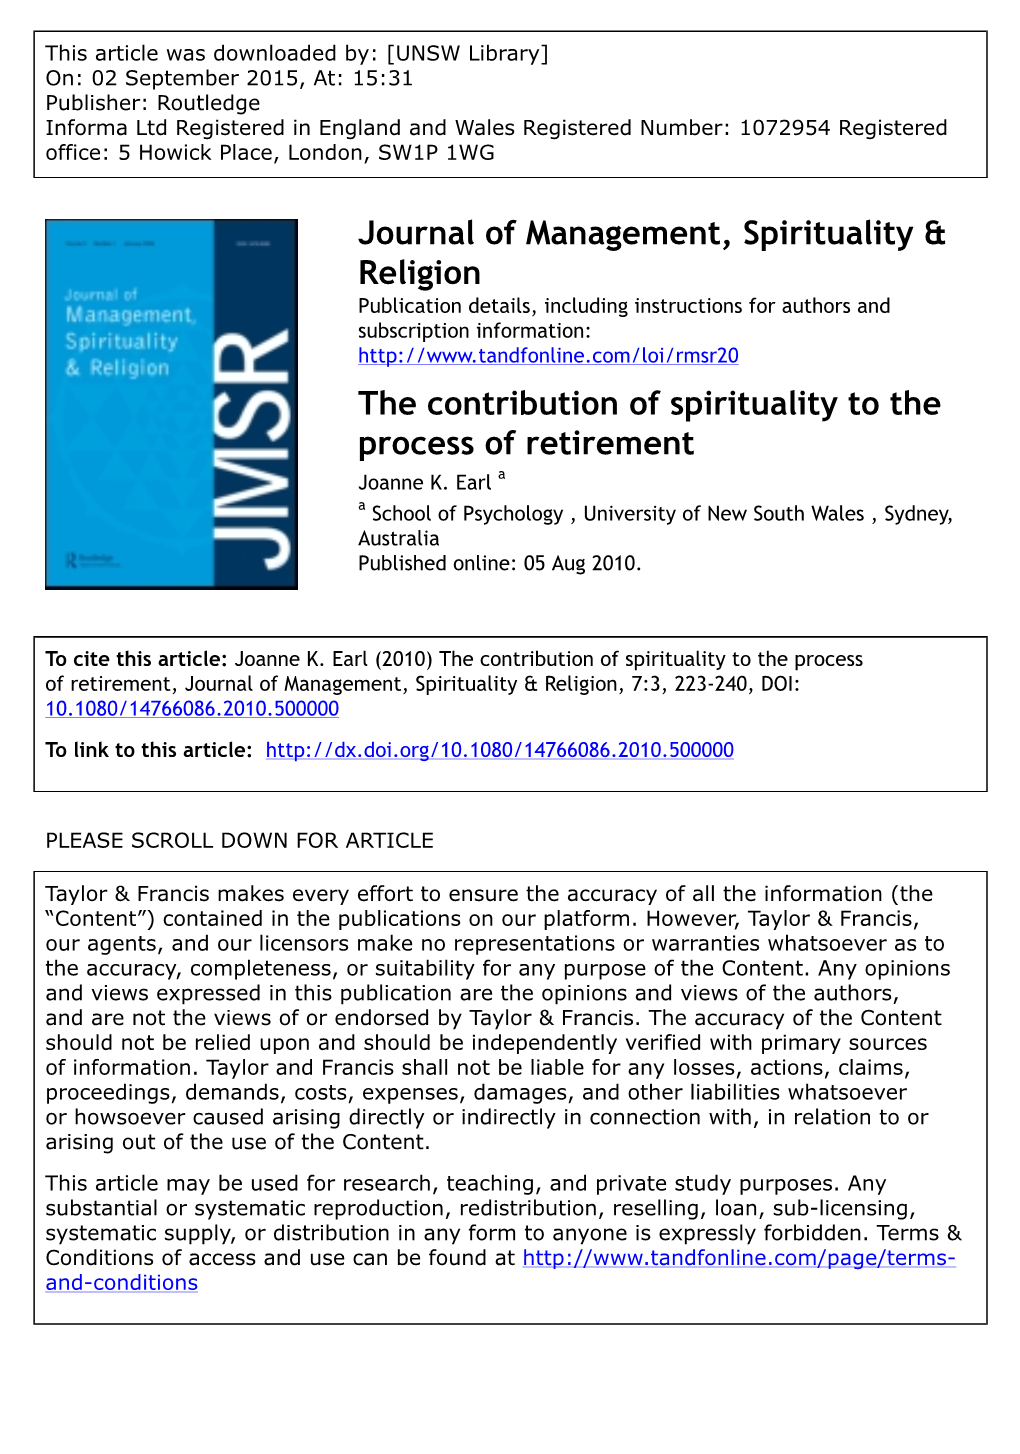 Journal of Management, Spirituality & Religion the Contribution Of